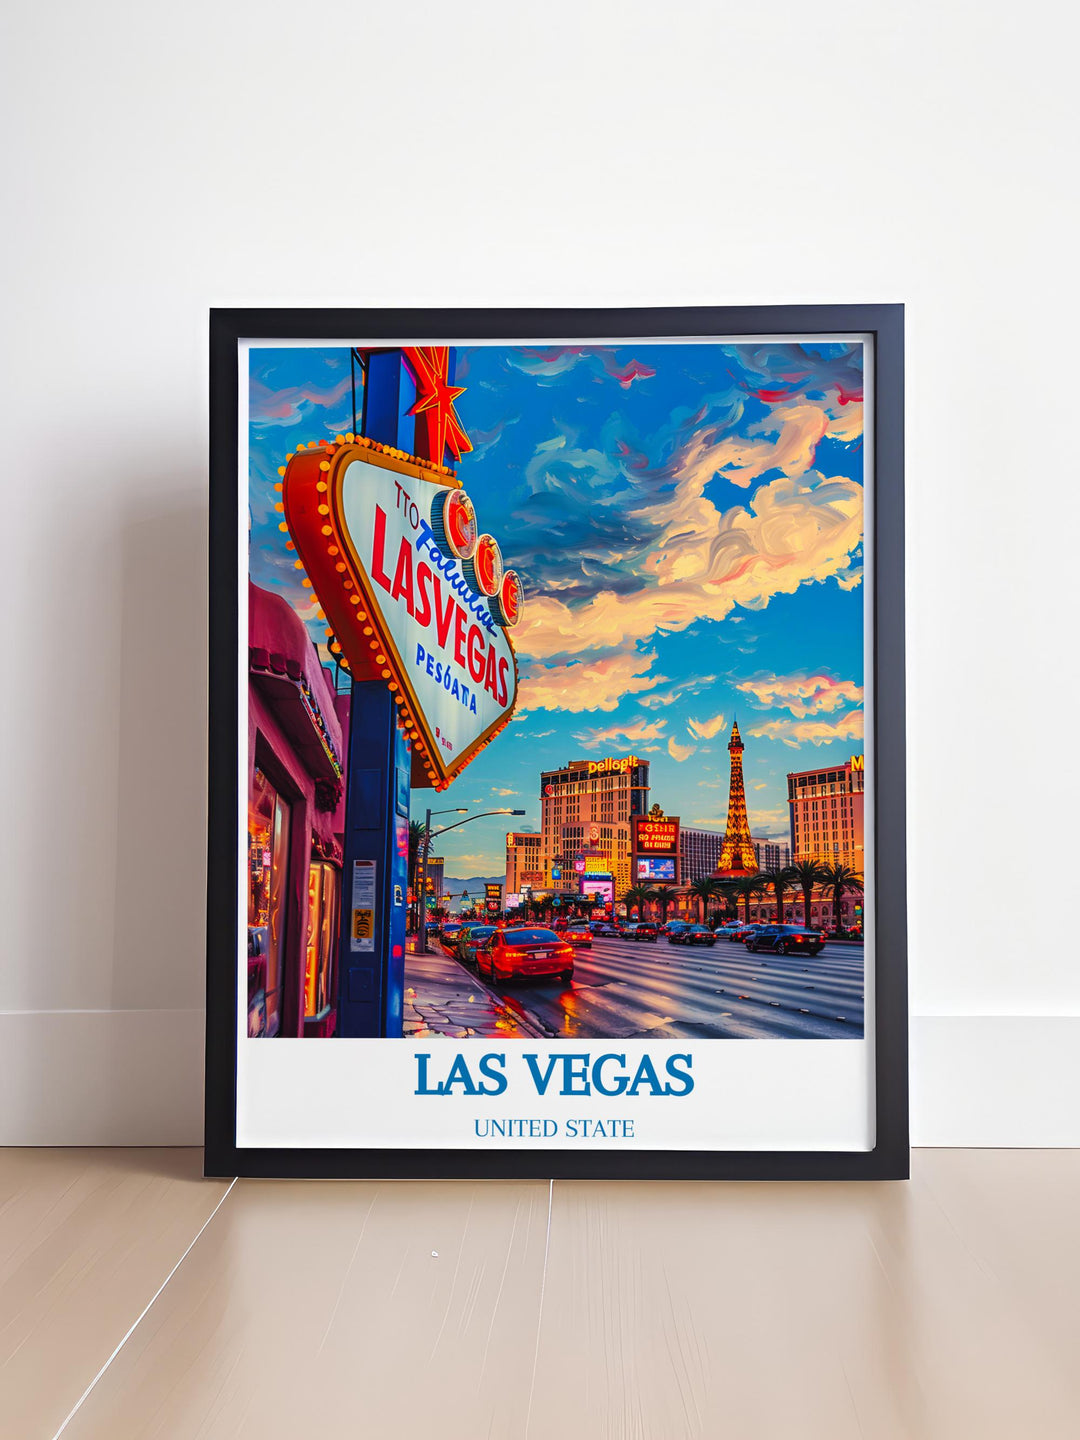 Framed art piece showcasing an iconic view of the Las Vegas Strip, ideal for those who appreciate the citys dynamic nightlife.